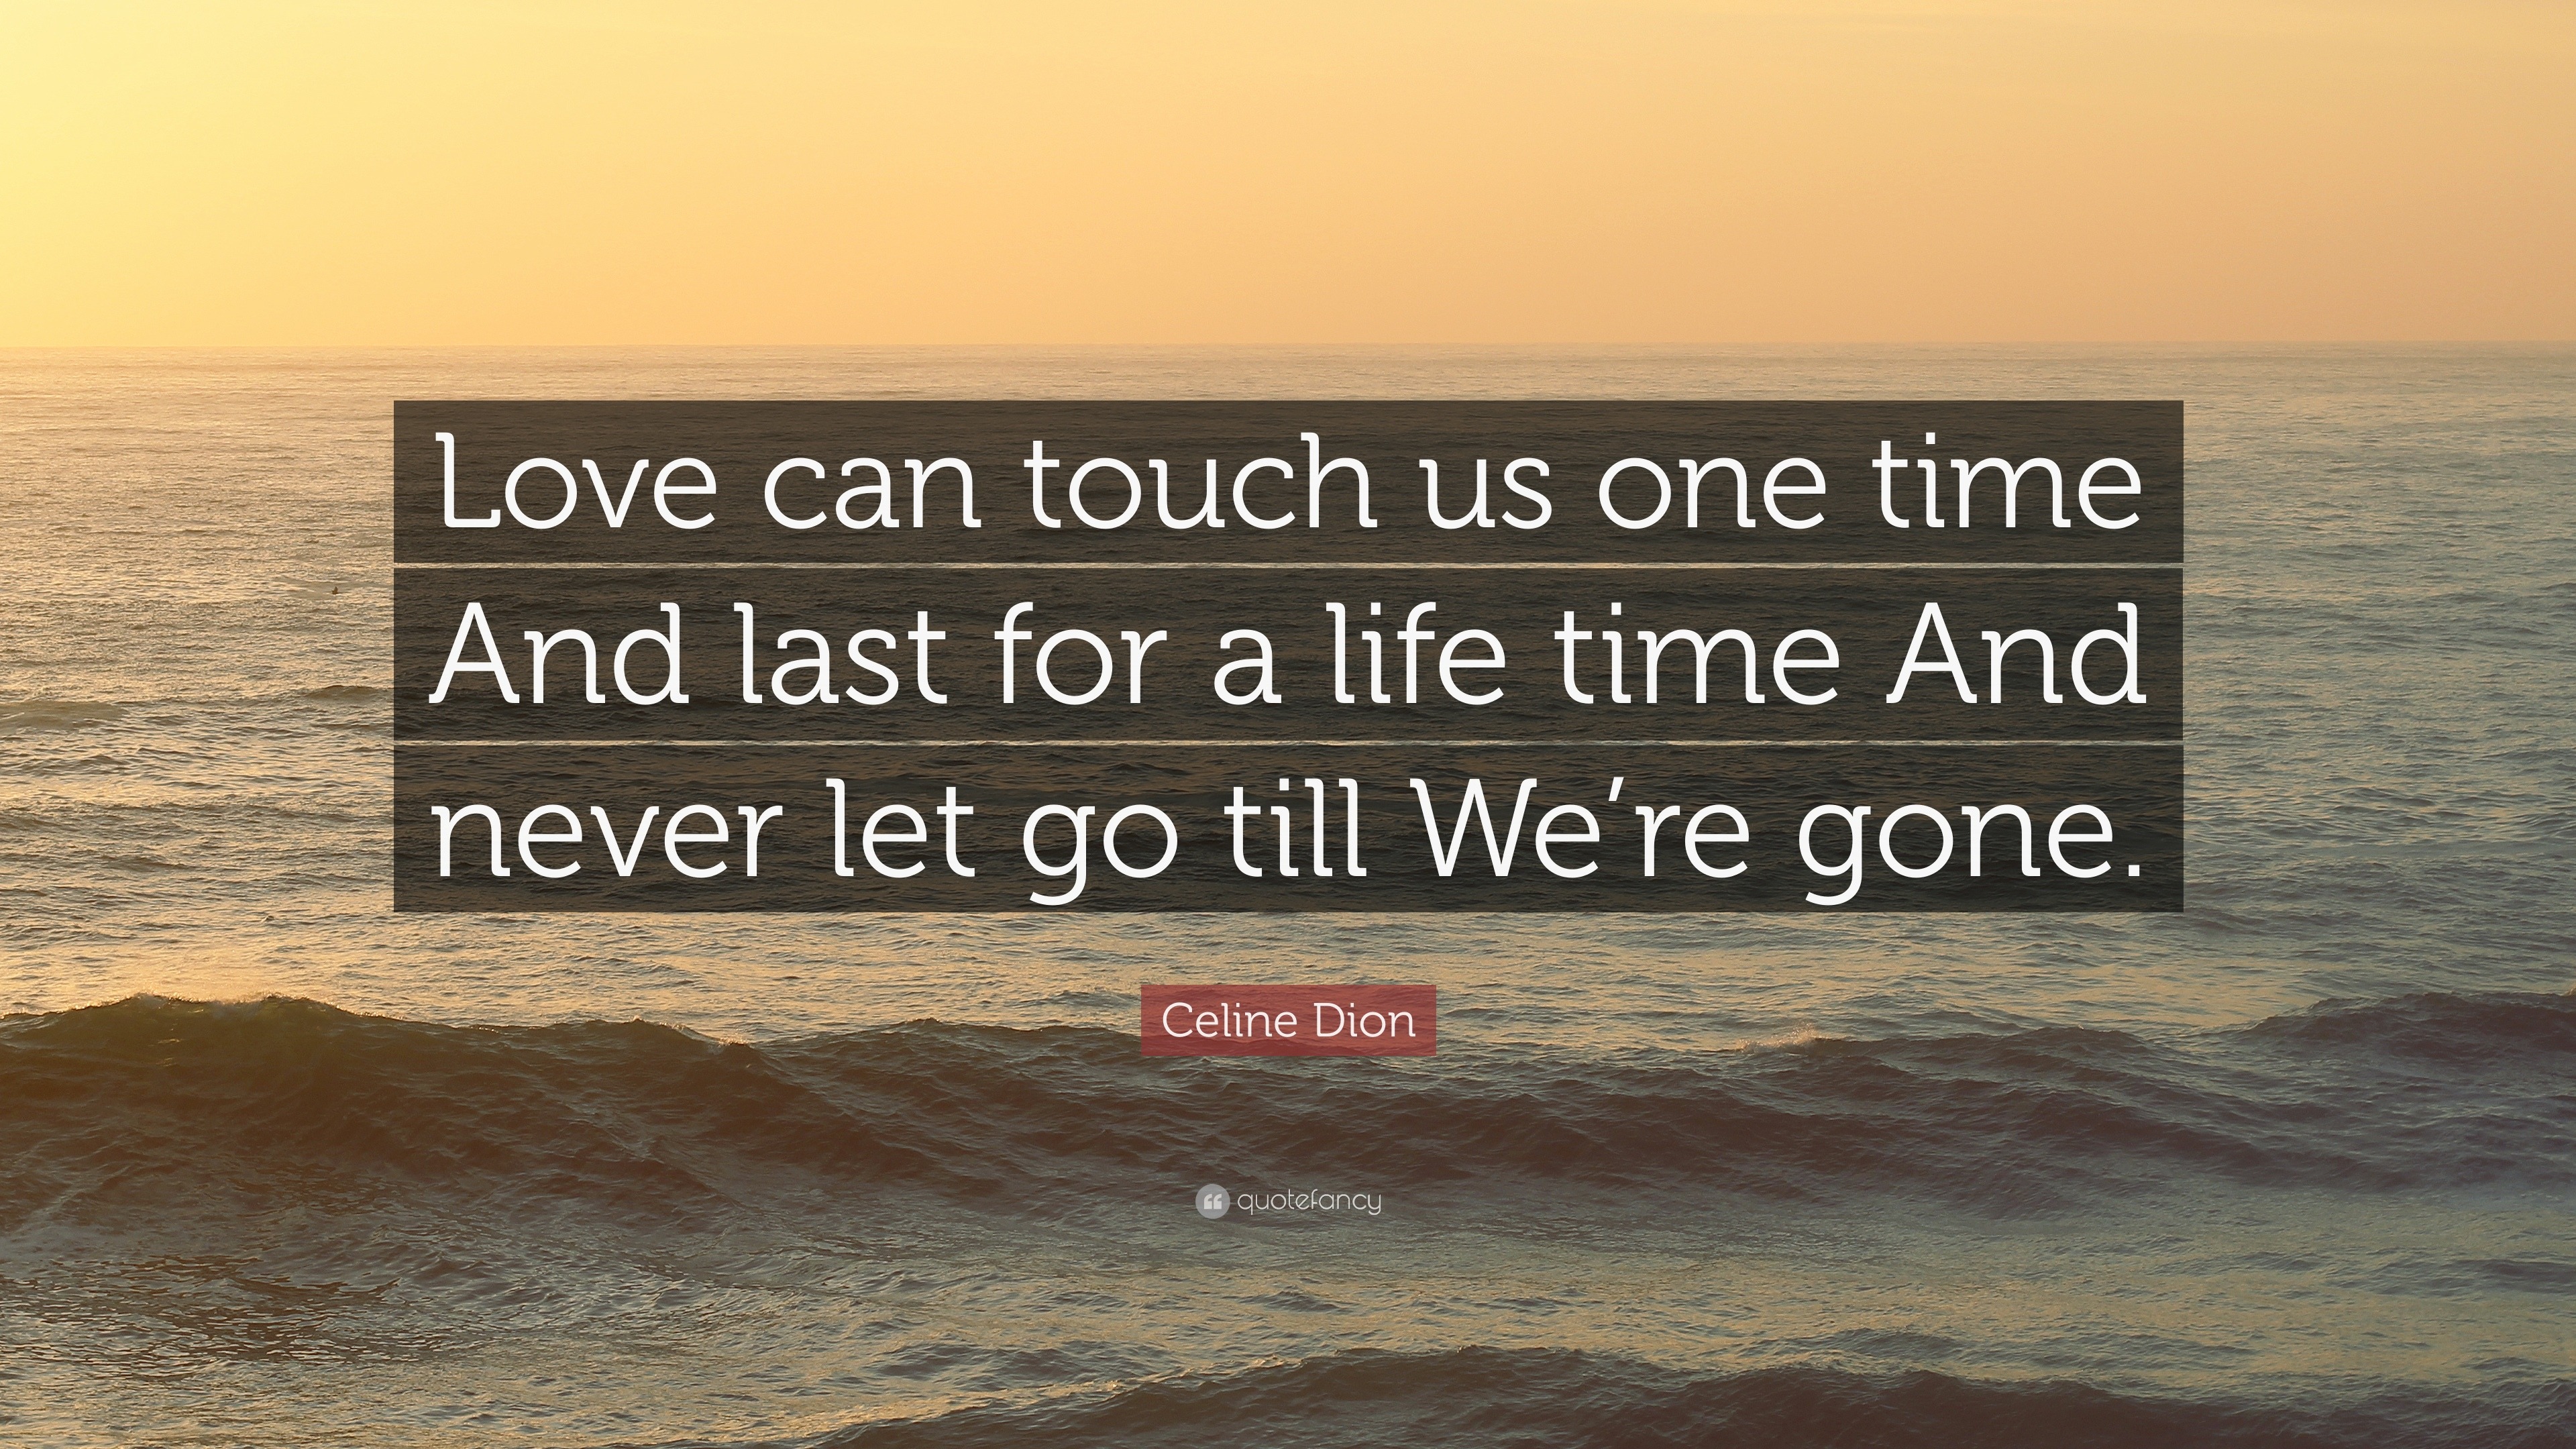 Celine Dion Quote “Love can touch us one time And last for a life